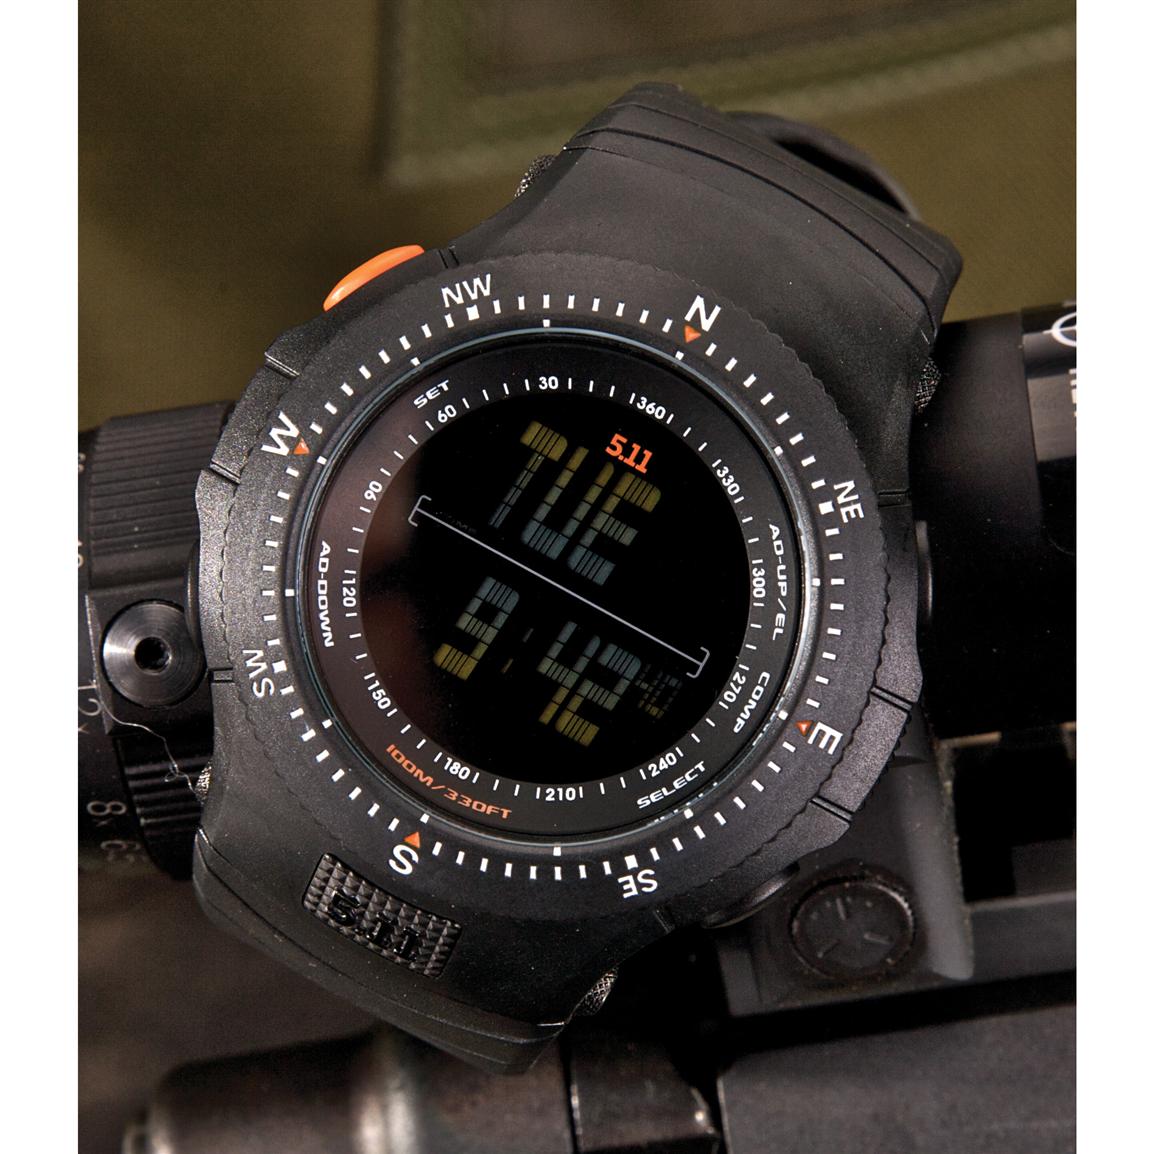 5 11 Tactical® Field Ops Watch 165062 Watches At Sportsman S Guide